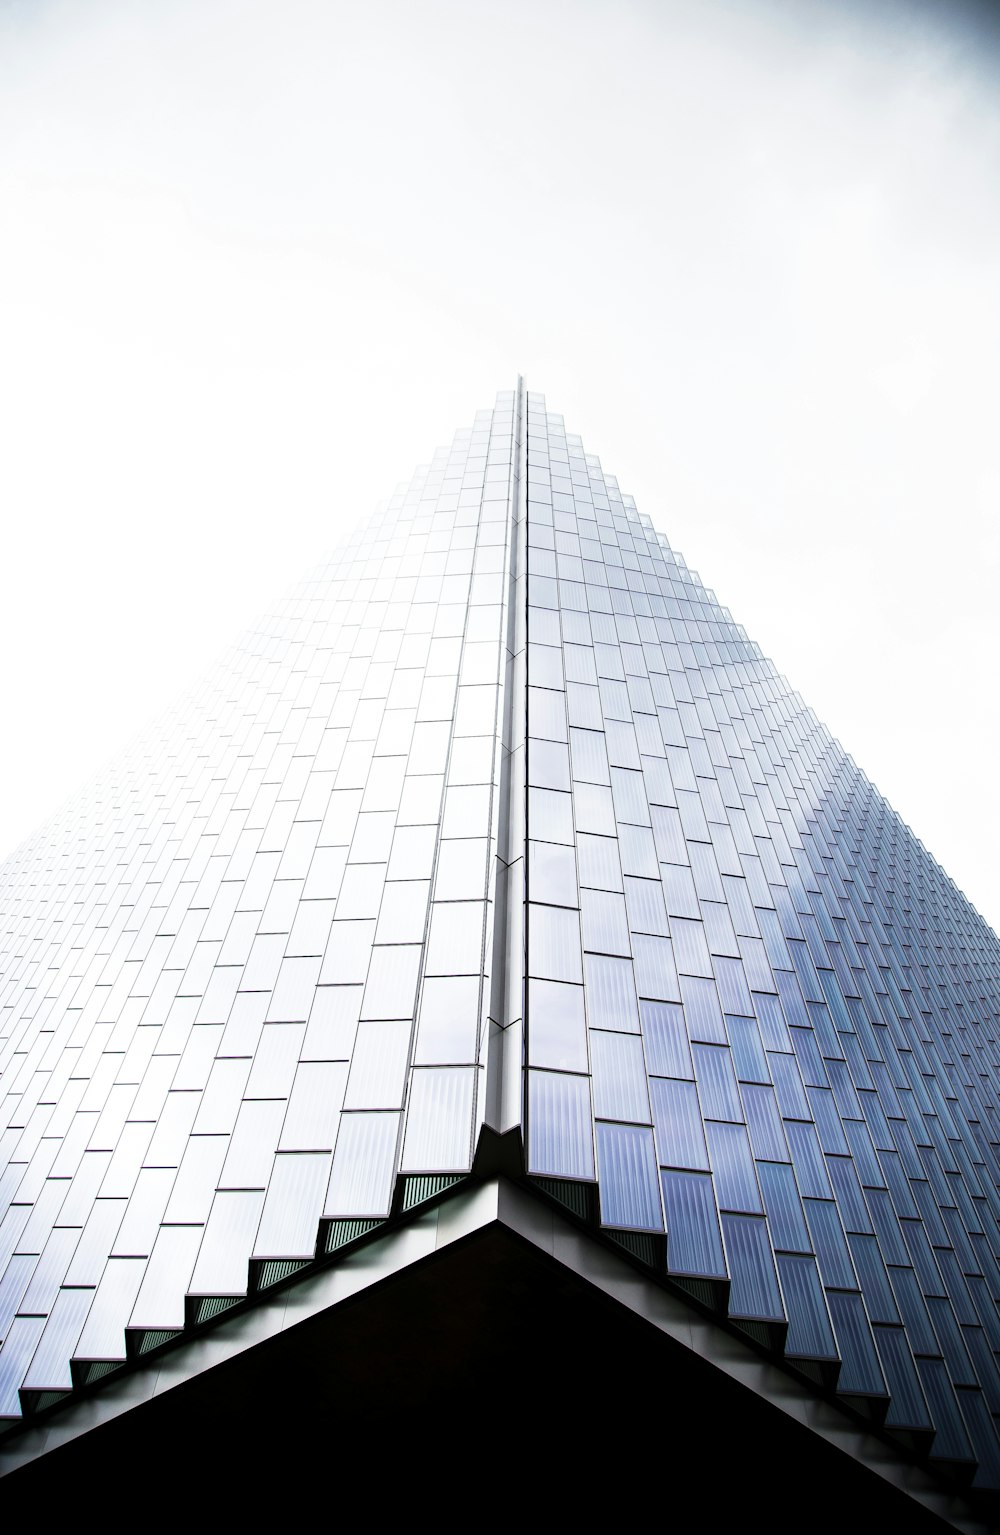 worm's eye view of high-rise building during daytime